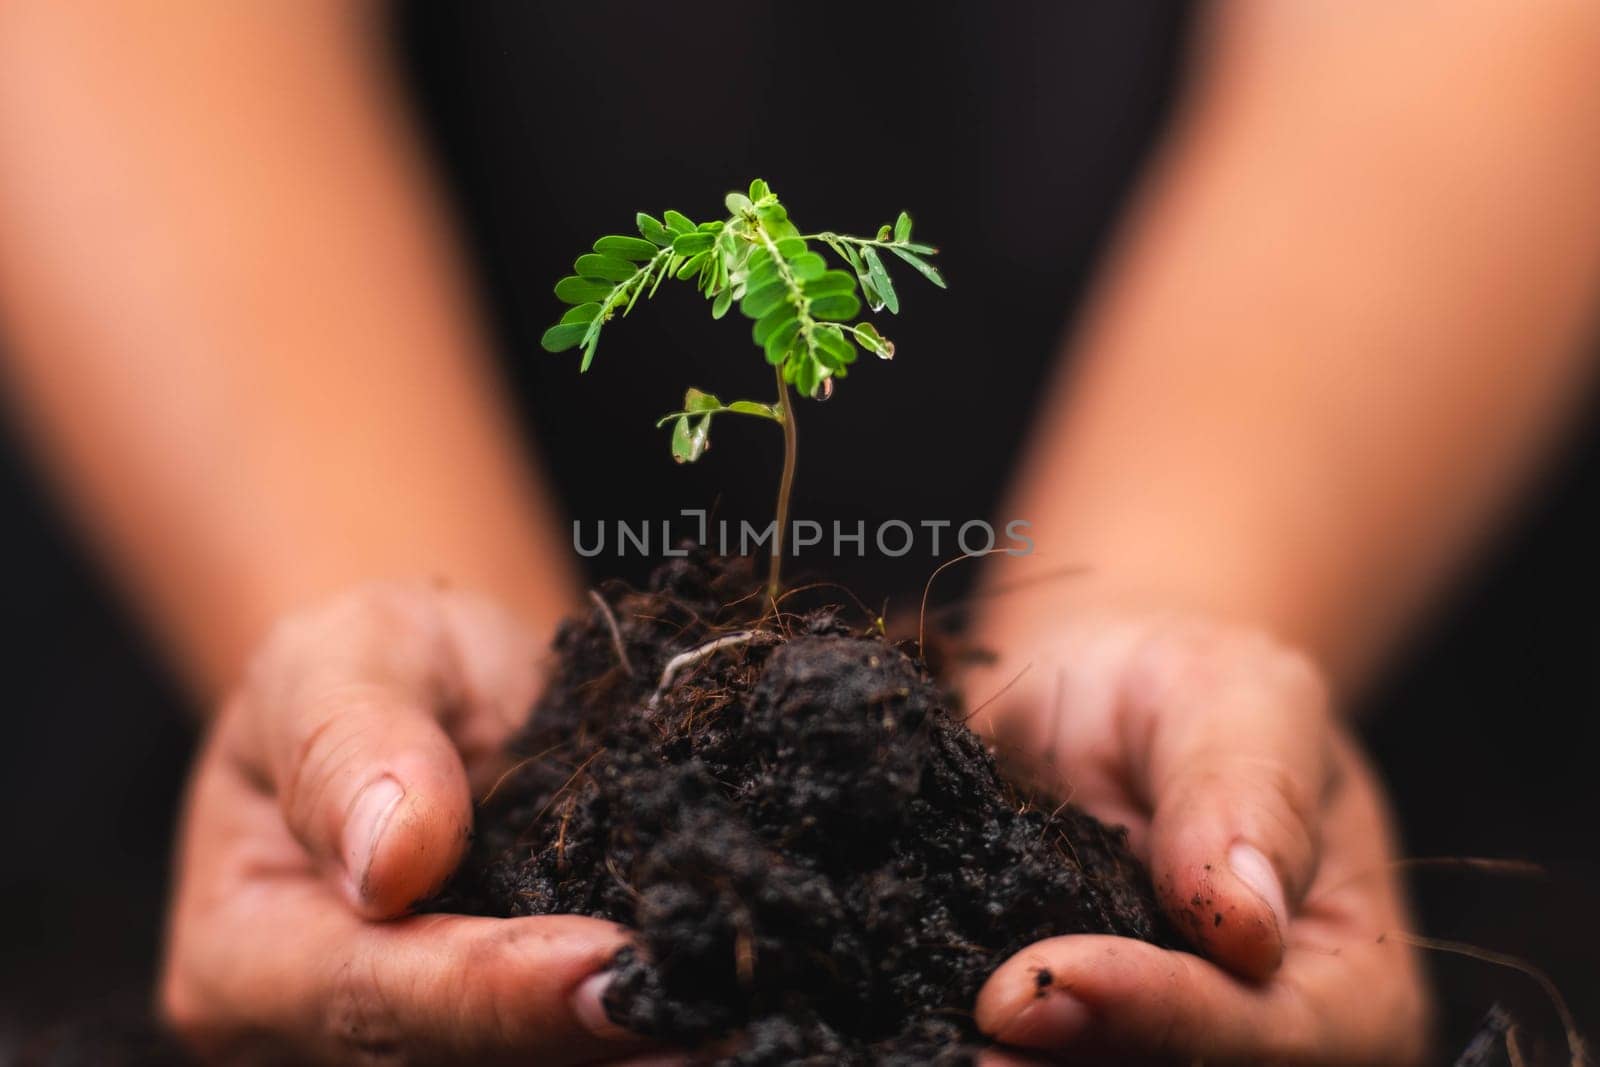 Hands holding young green plant. Small plants on the ground in spring. New life care, watering young plants on black background. The concept of planting trees and saving the world.